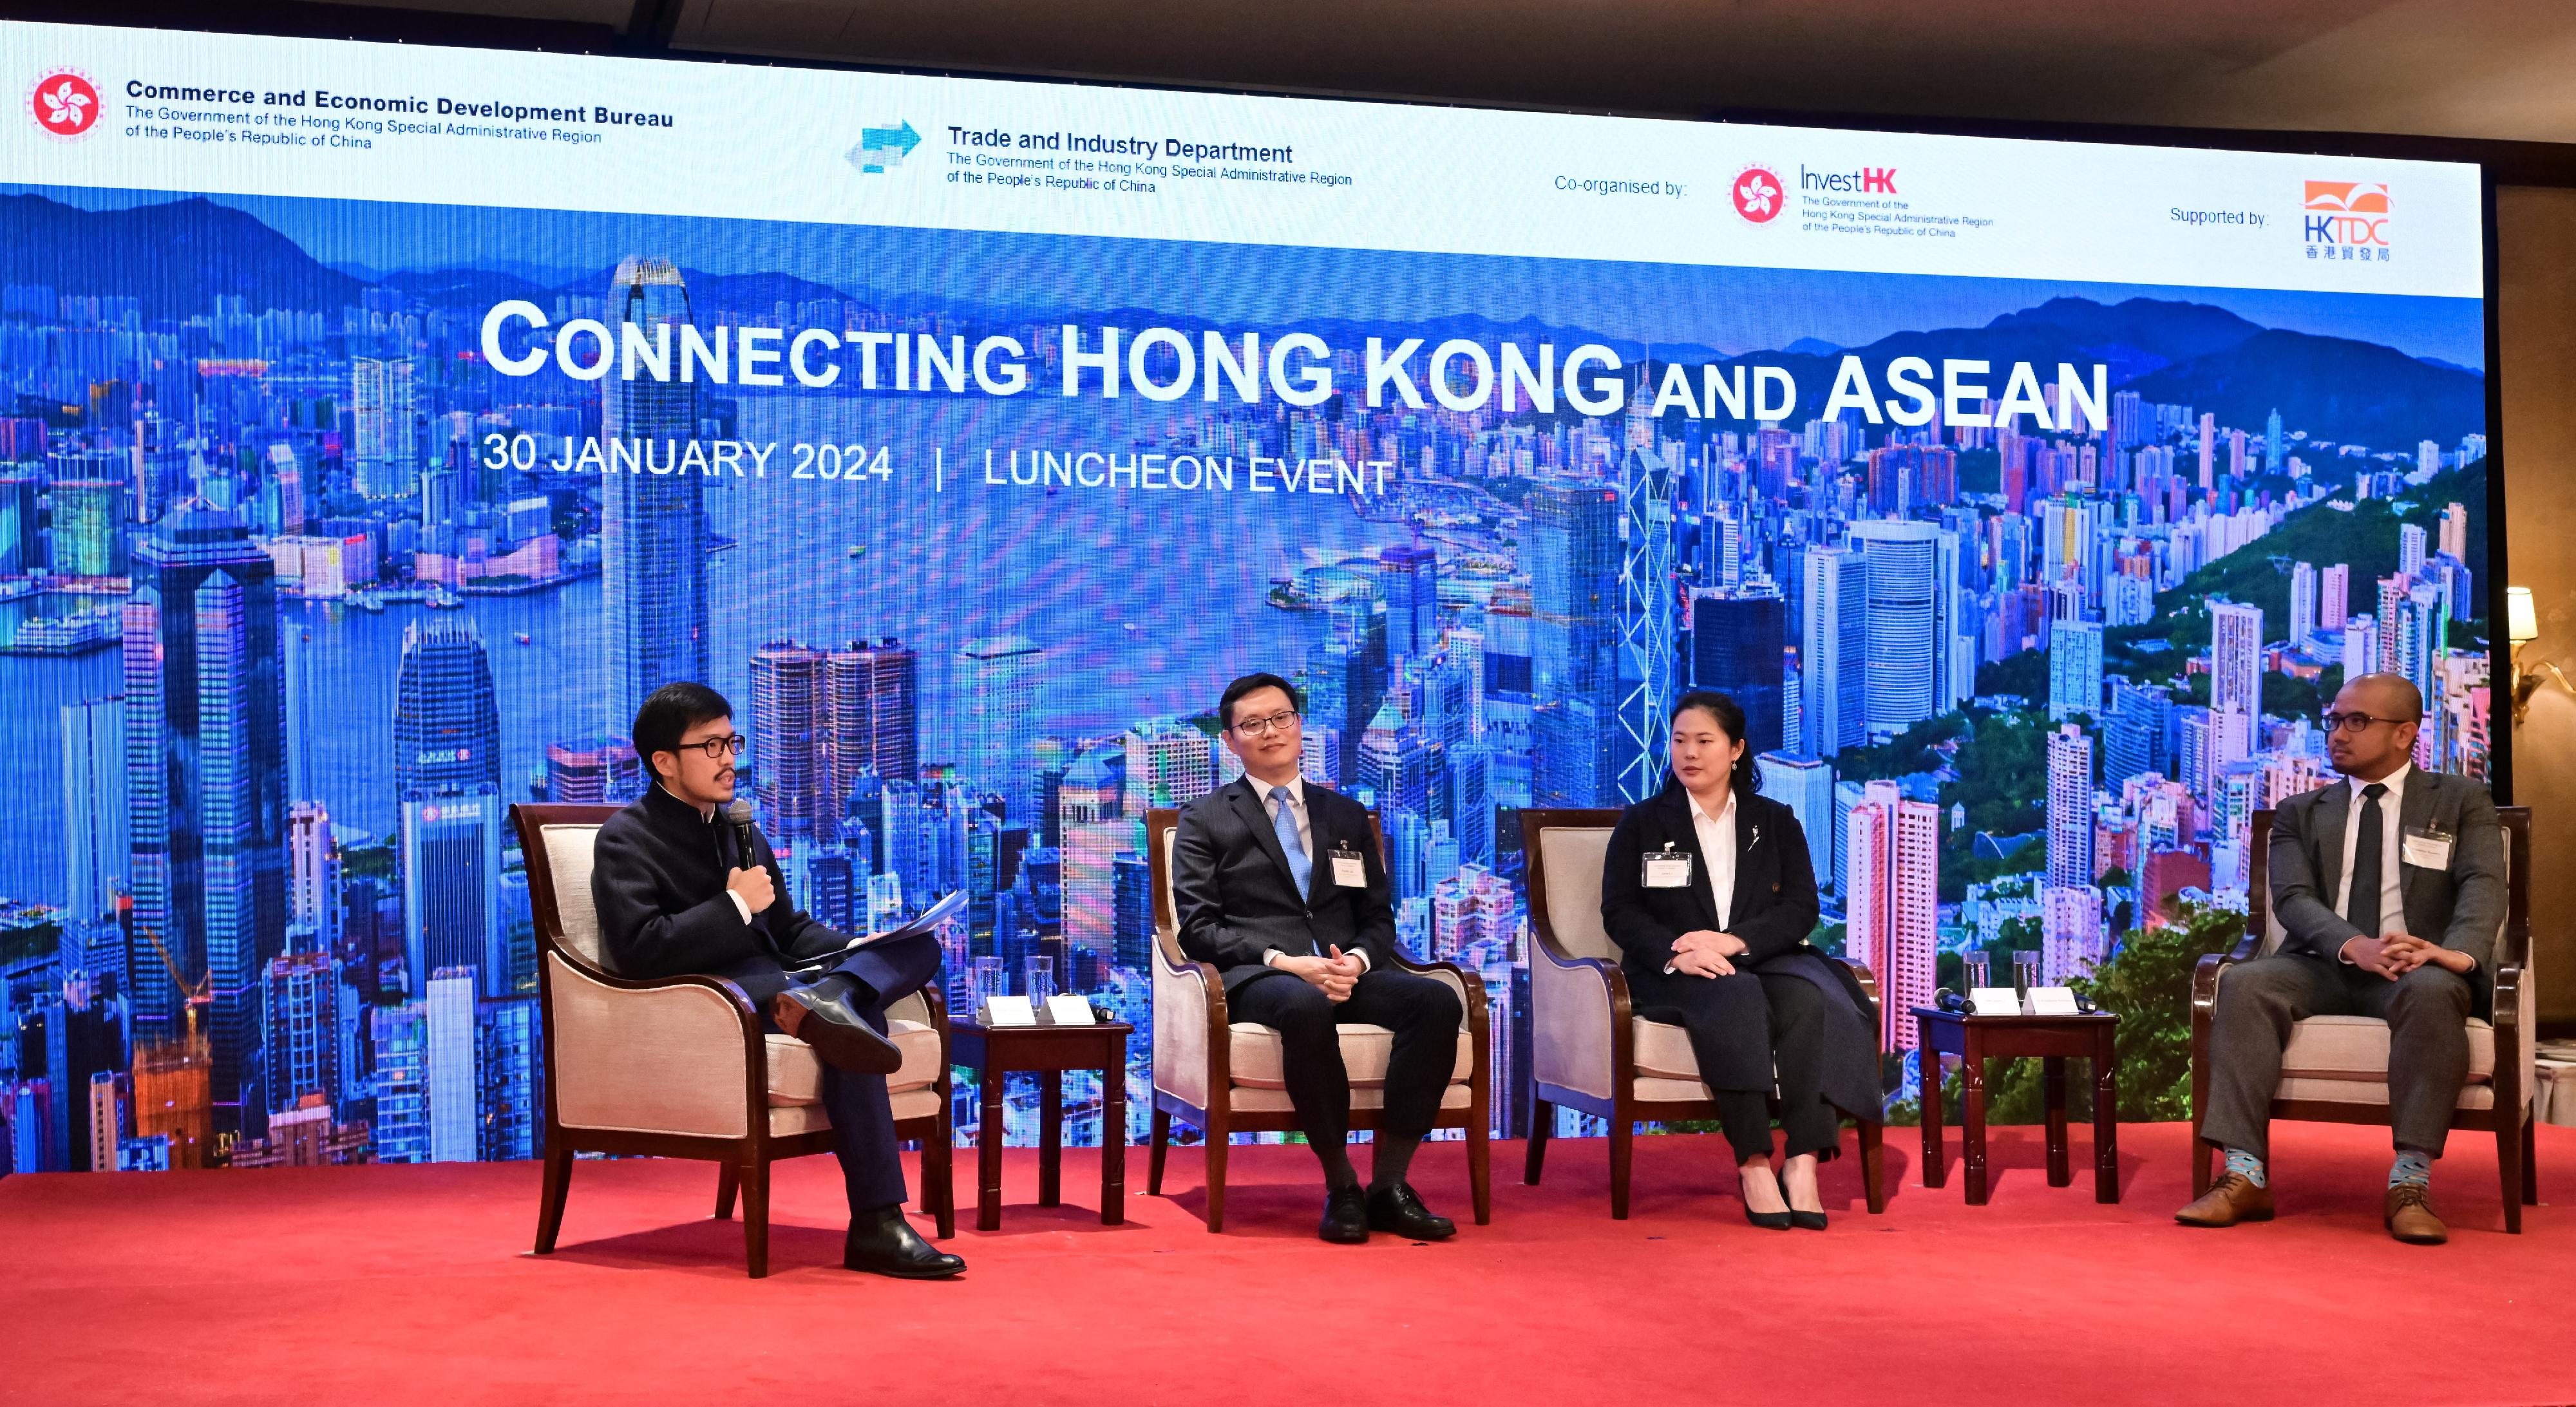 The Trade and Industry Department and Invest Hong Kong today (January 30) co-organised the "Connecting Hong Kong and ASEAN" Luncheon for some 120 representatives of consulates, local and foreign chambers of commerce, professional bodies and the business community to update them on the Government's work on strengthening connection with the Association of Southeast Asian Nations. Photo shows the Commissioner for Belt and Road, Mr Nicholas Ho (first left), moderating the panel discussion at the luncheon and exchanging views with Deputy Executive Director of the Hong Kong Trade Development Council Dr Patrick Lau (second left); the Founder of Yang Consulting and Craft Hong Kong, Ms Jane Li (second right); and Director III of the Intellectual Property Office of the Philippines Dr Frederick Romero (first right).